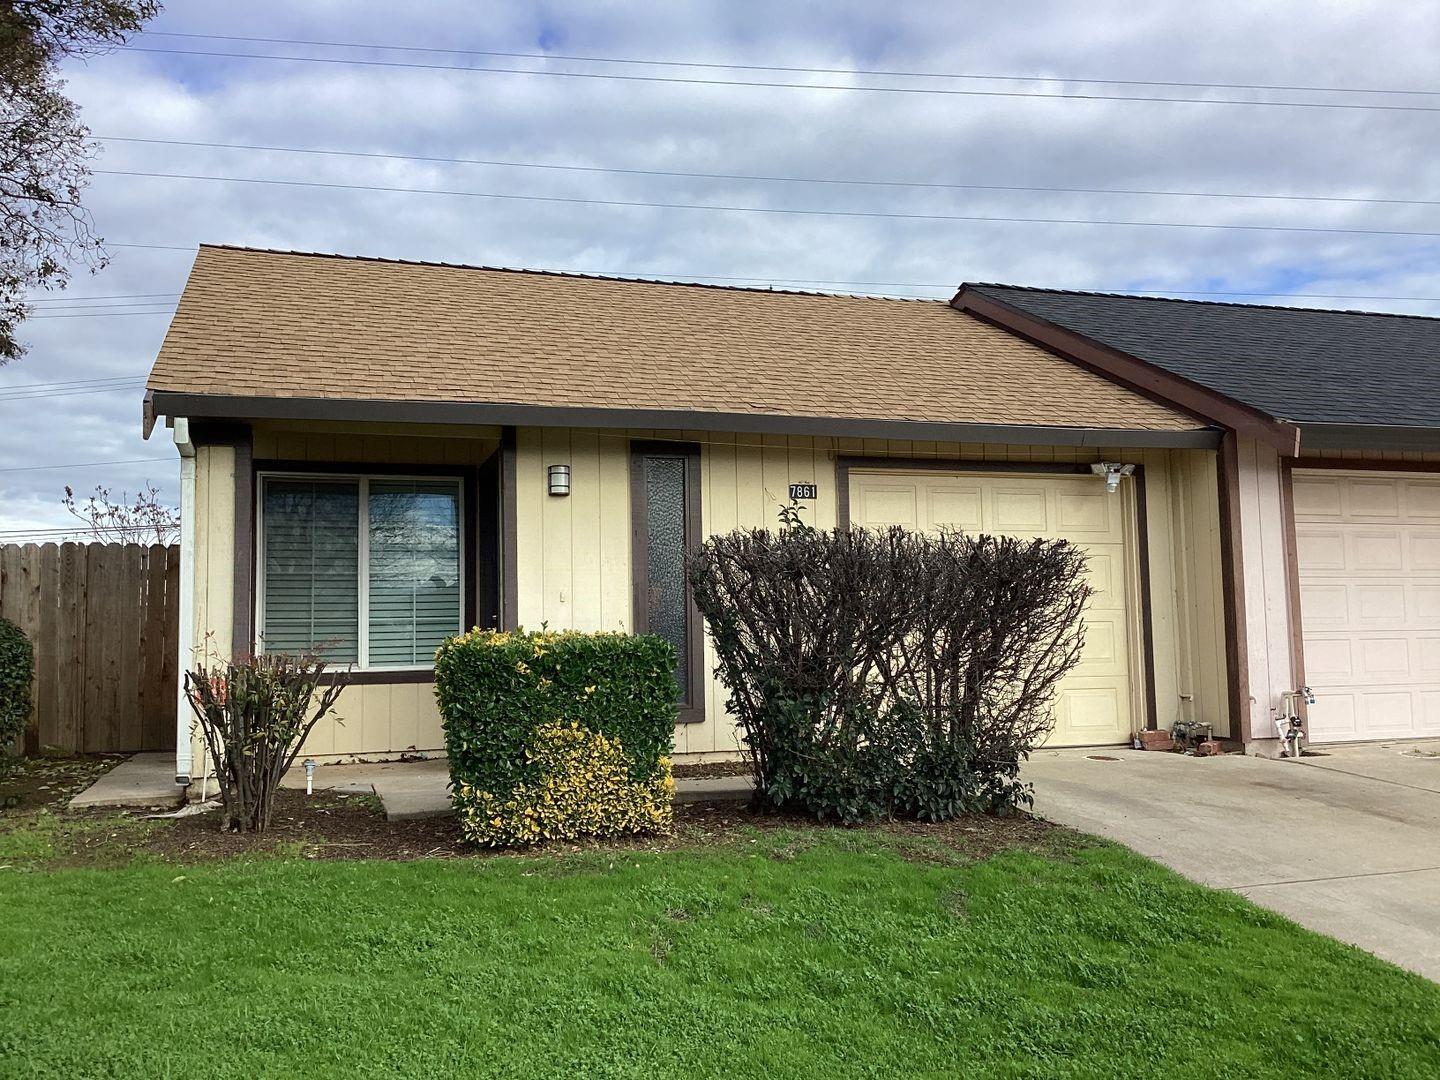 Photo of 7861 Orchard Woods Cir in Sacramento, CA